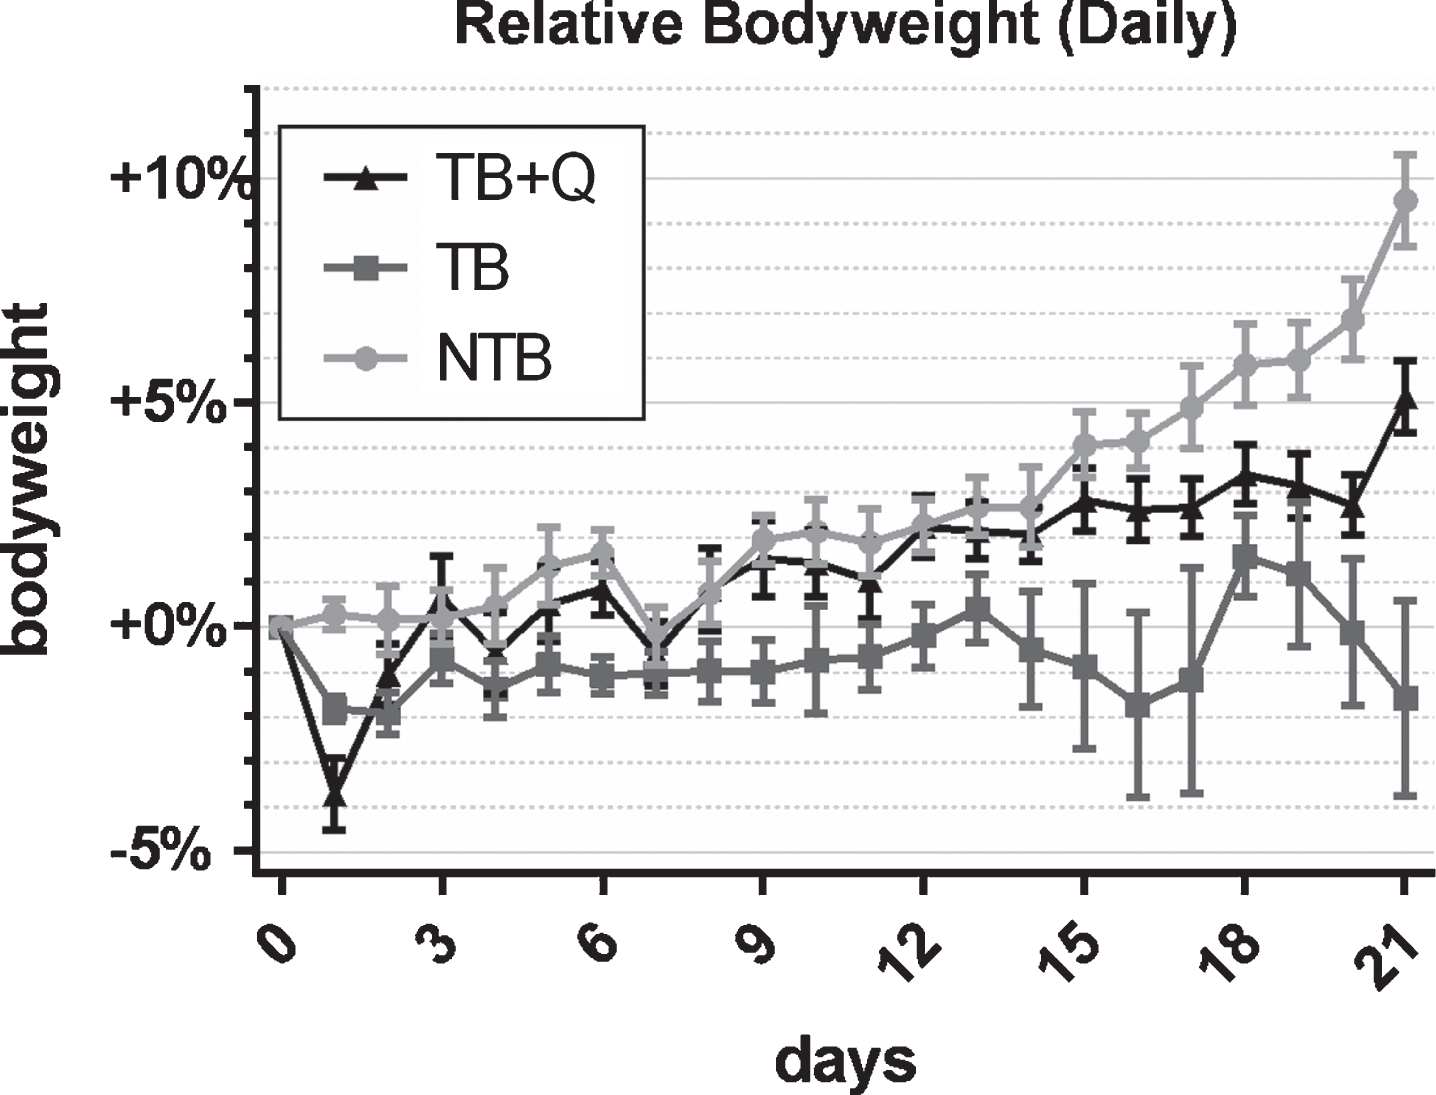 Daily bodyweight throughout the experiment. Line chart depicting the mean±SEM daily bodyweights per group in non-tumor-bearing male CD2F1 mice (NTB, n = 10), C26 tumor-bearing (TB, n = 10) mice with ad libitum access to regular chow, and C26 TB mice with ad libitum access to quercetin supplemented chow (TB + Q, n = 10). Bodyweight was normalized to each animal’s bodyweight on day 0 and is expressed as the percental difference. Mice in the TB group experienced a significant loss of bodyweight in comparison to both TB + Q and NTB mice.